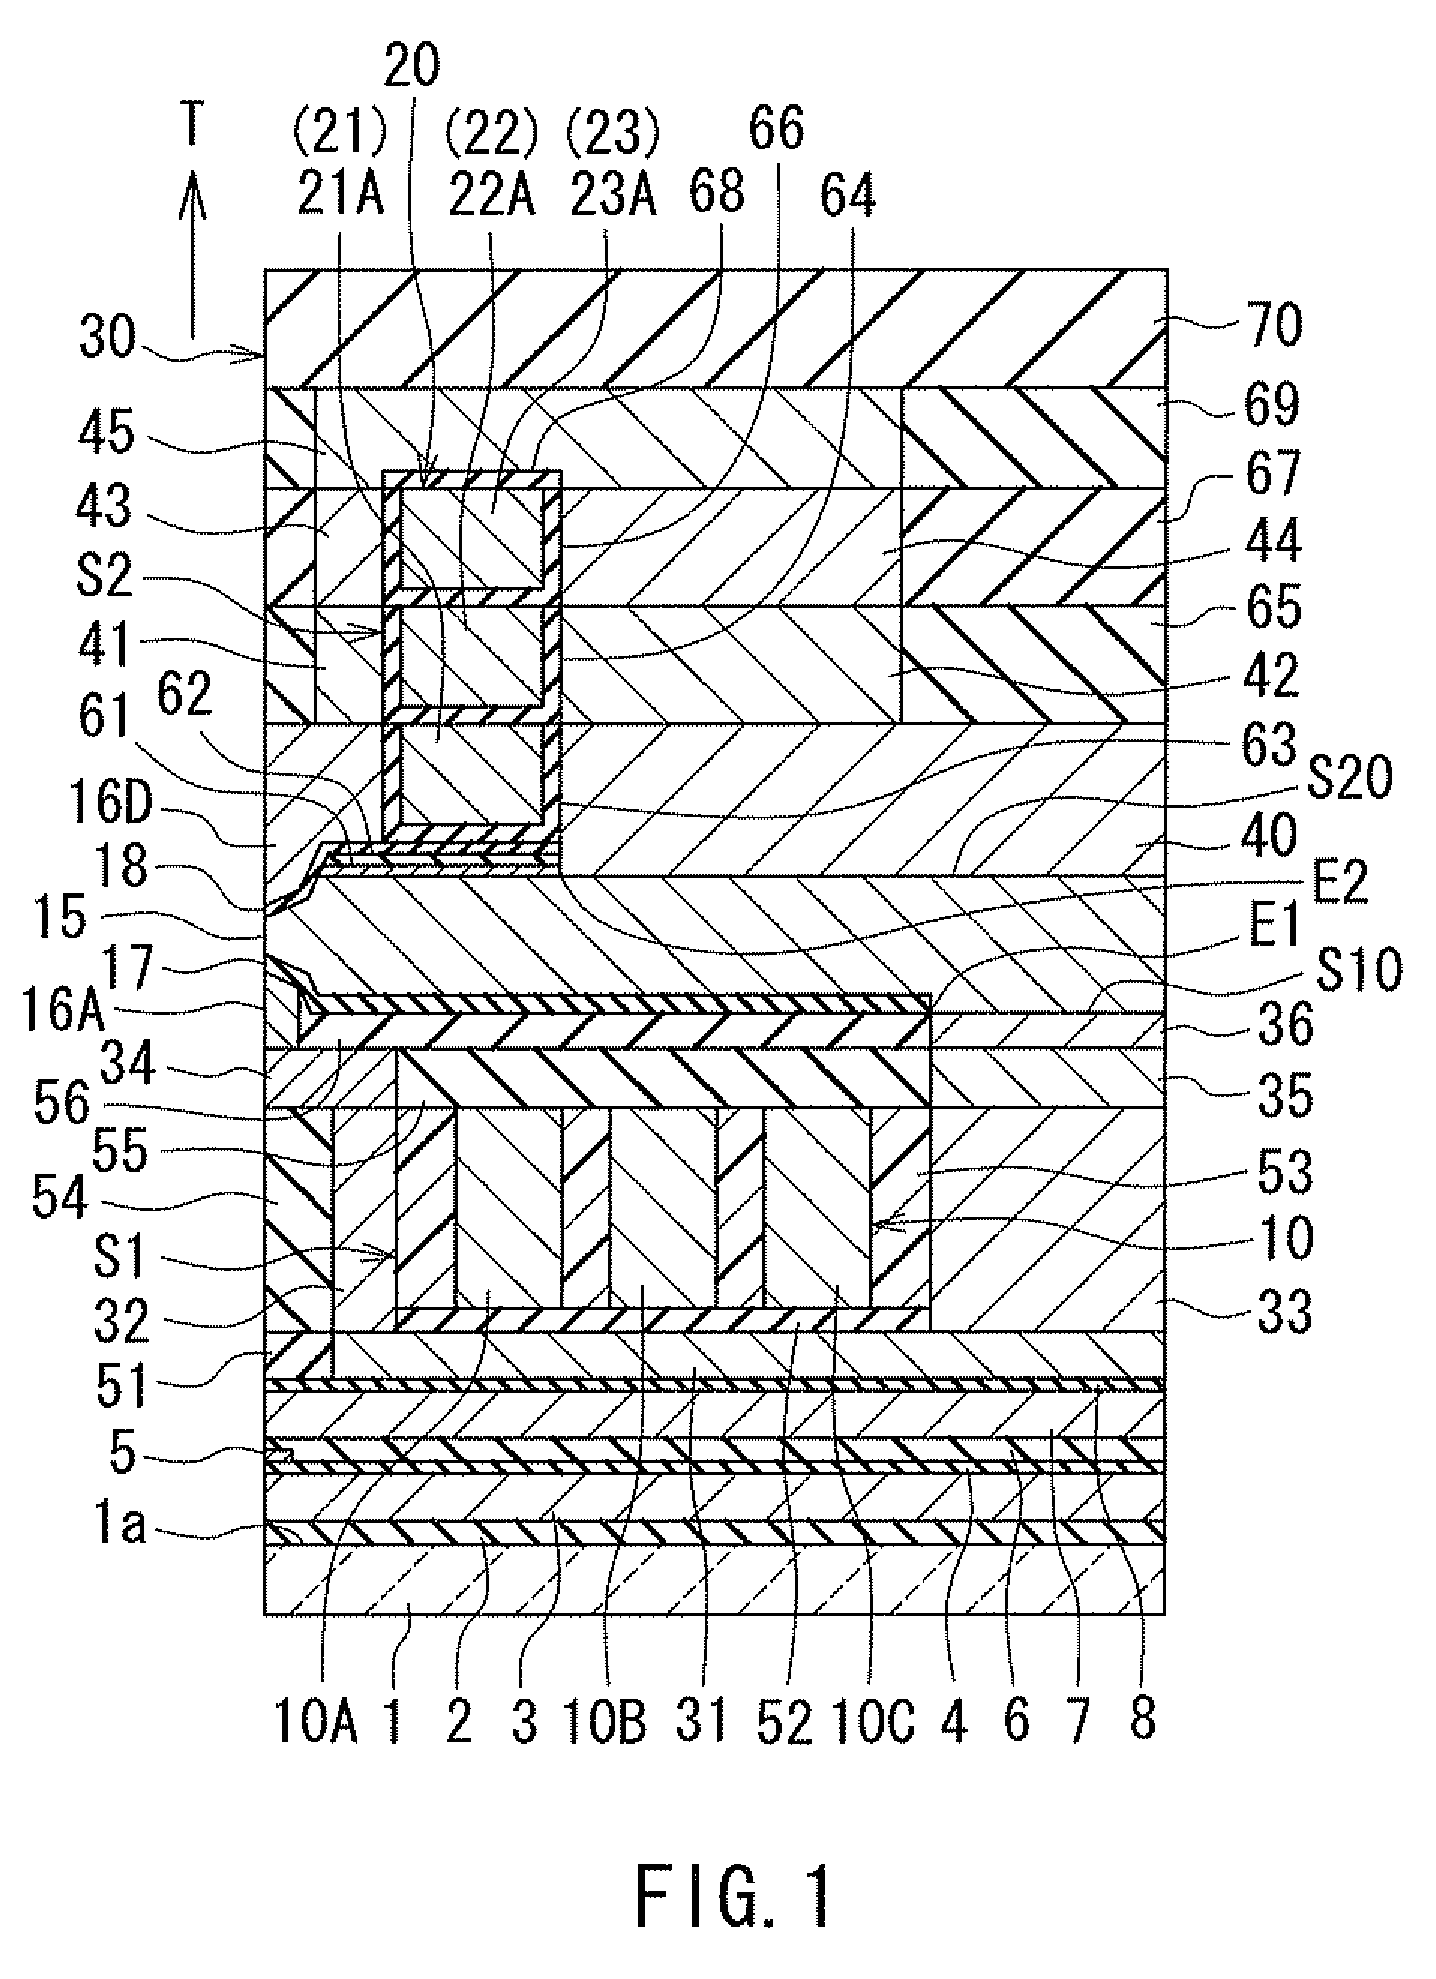 Magnetic head for perpendicular magnetic recording having a main pole and two shields